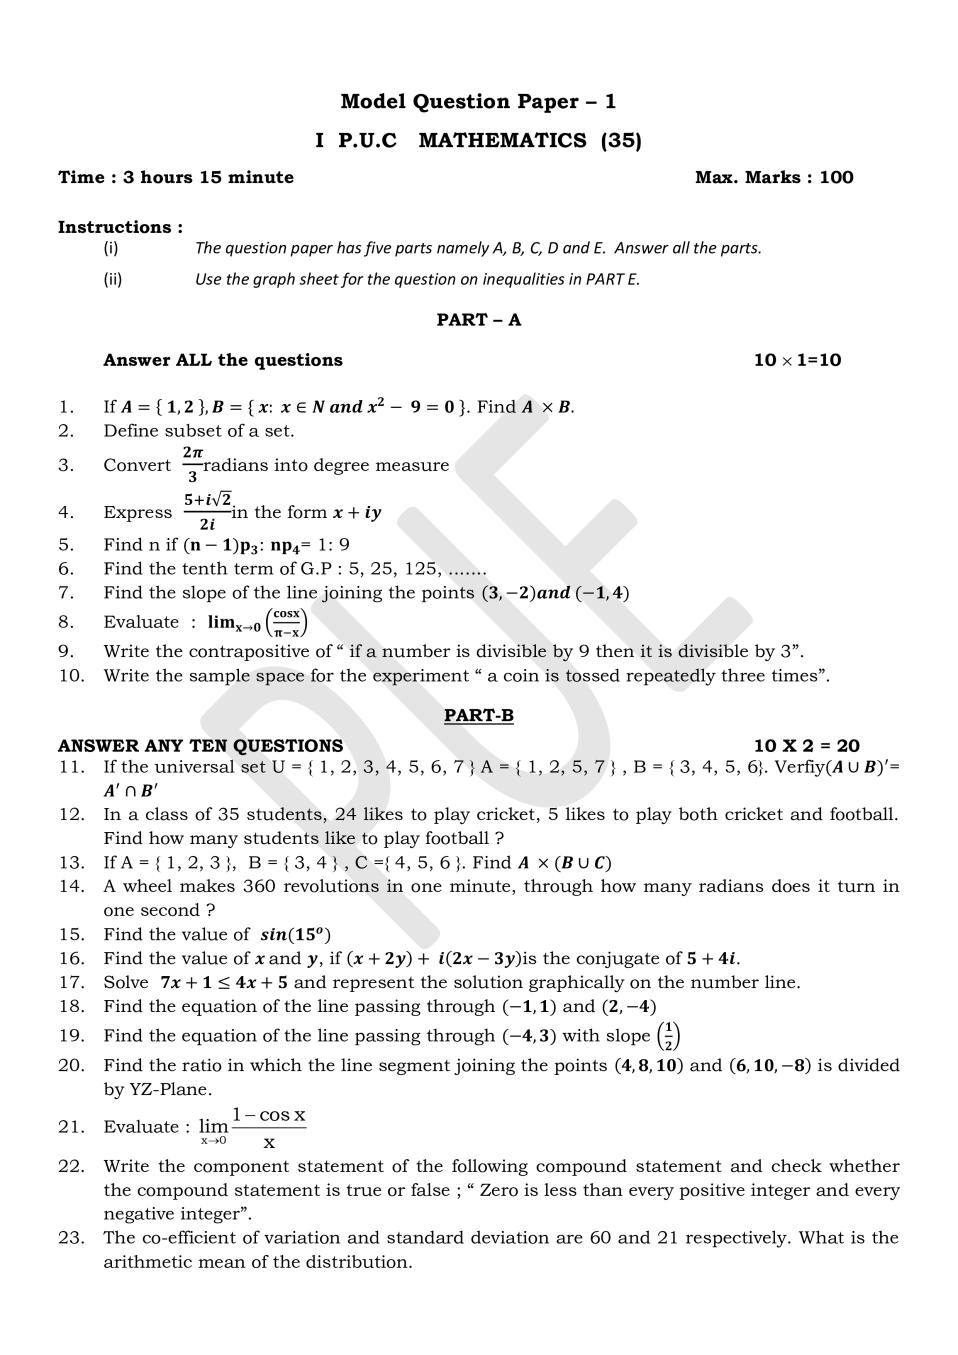 Karnataka 1st PUC Model Question Paper for Maths Set 1 - Page 1